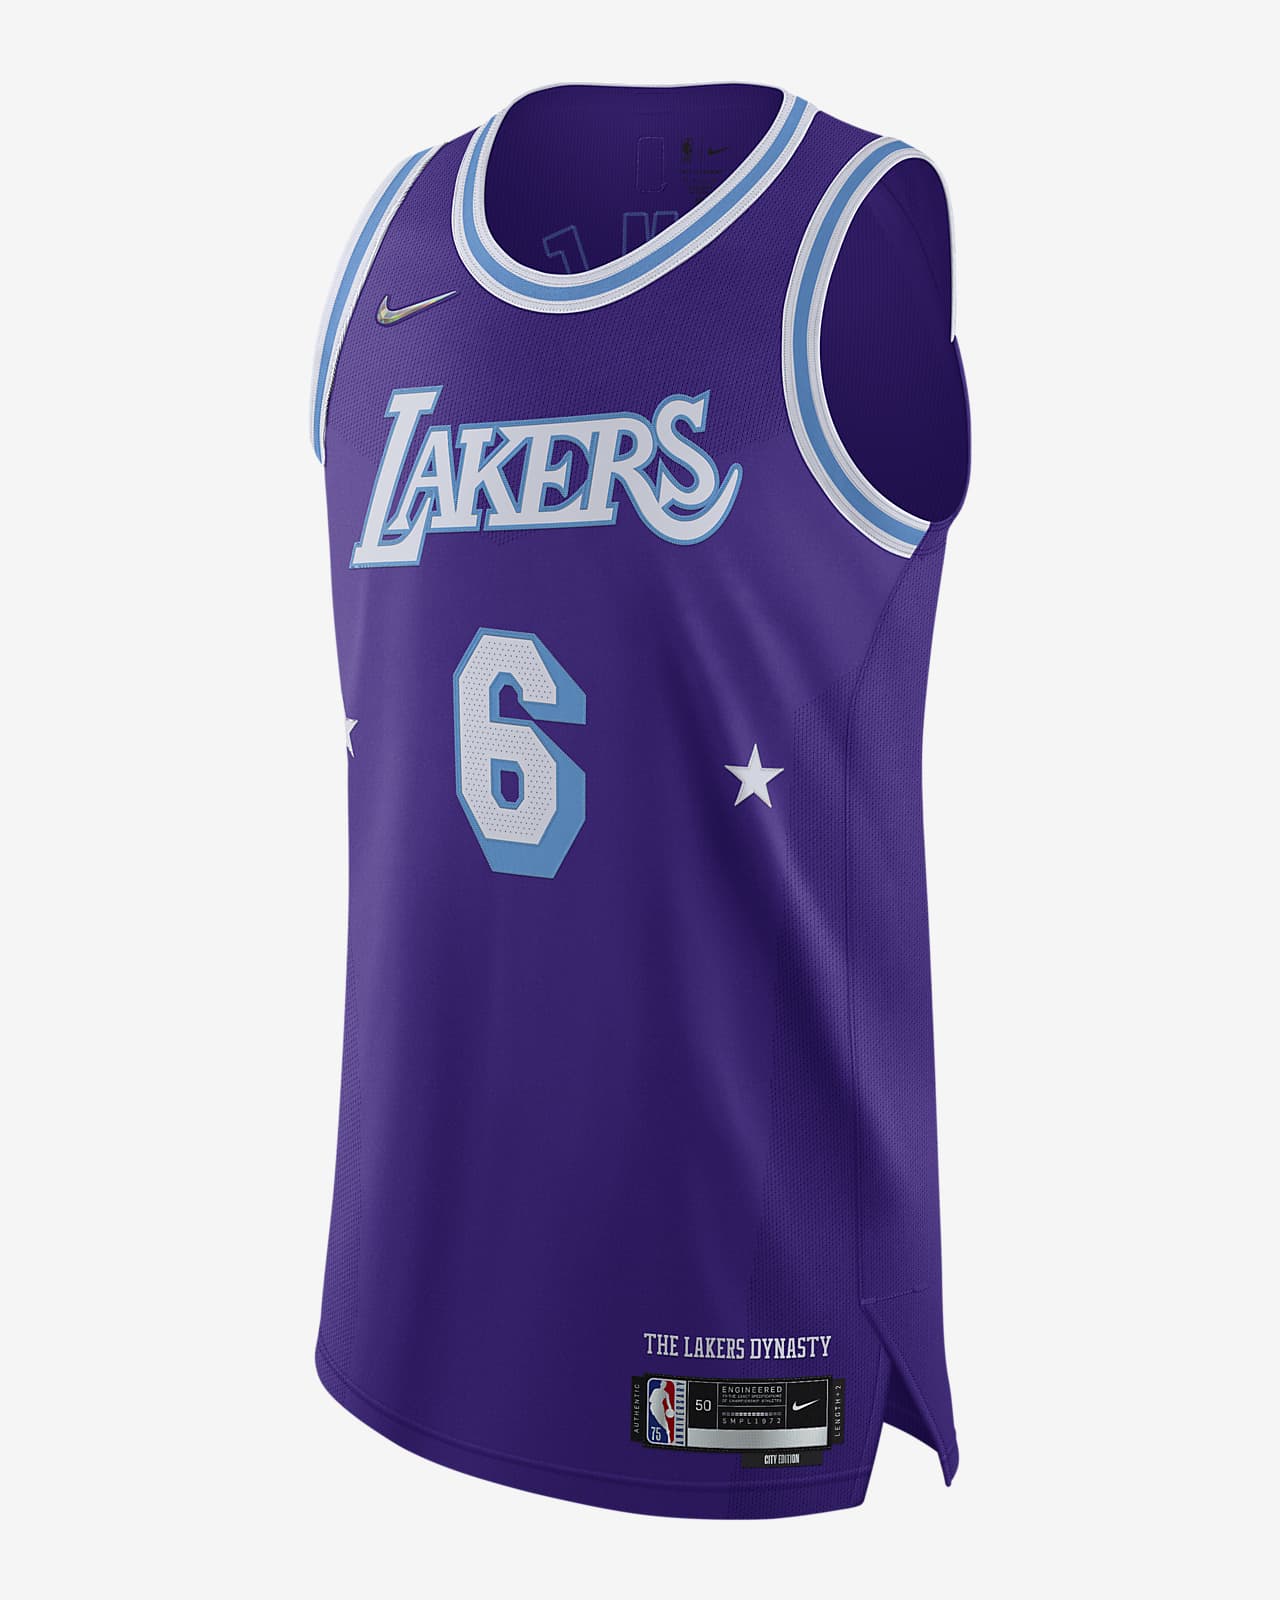 Los Angeles Lakers City Edition Nike Dri-FIT ADV NBA Authentic Jersey